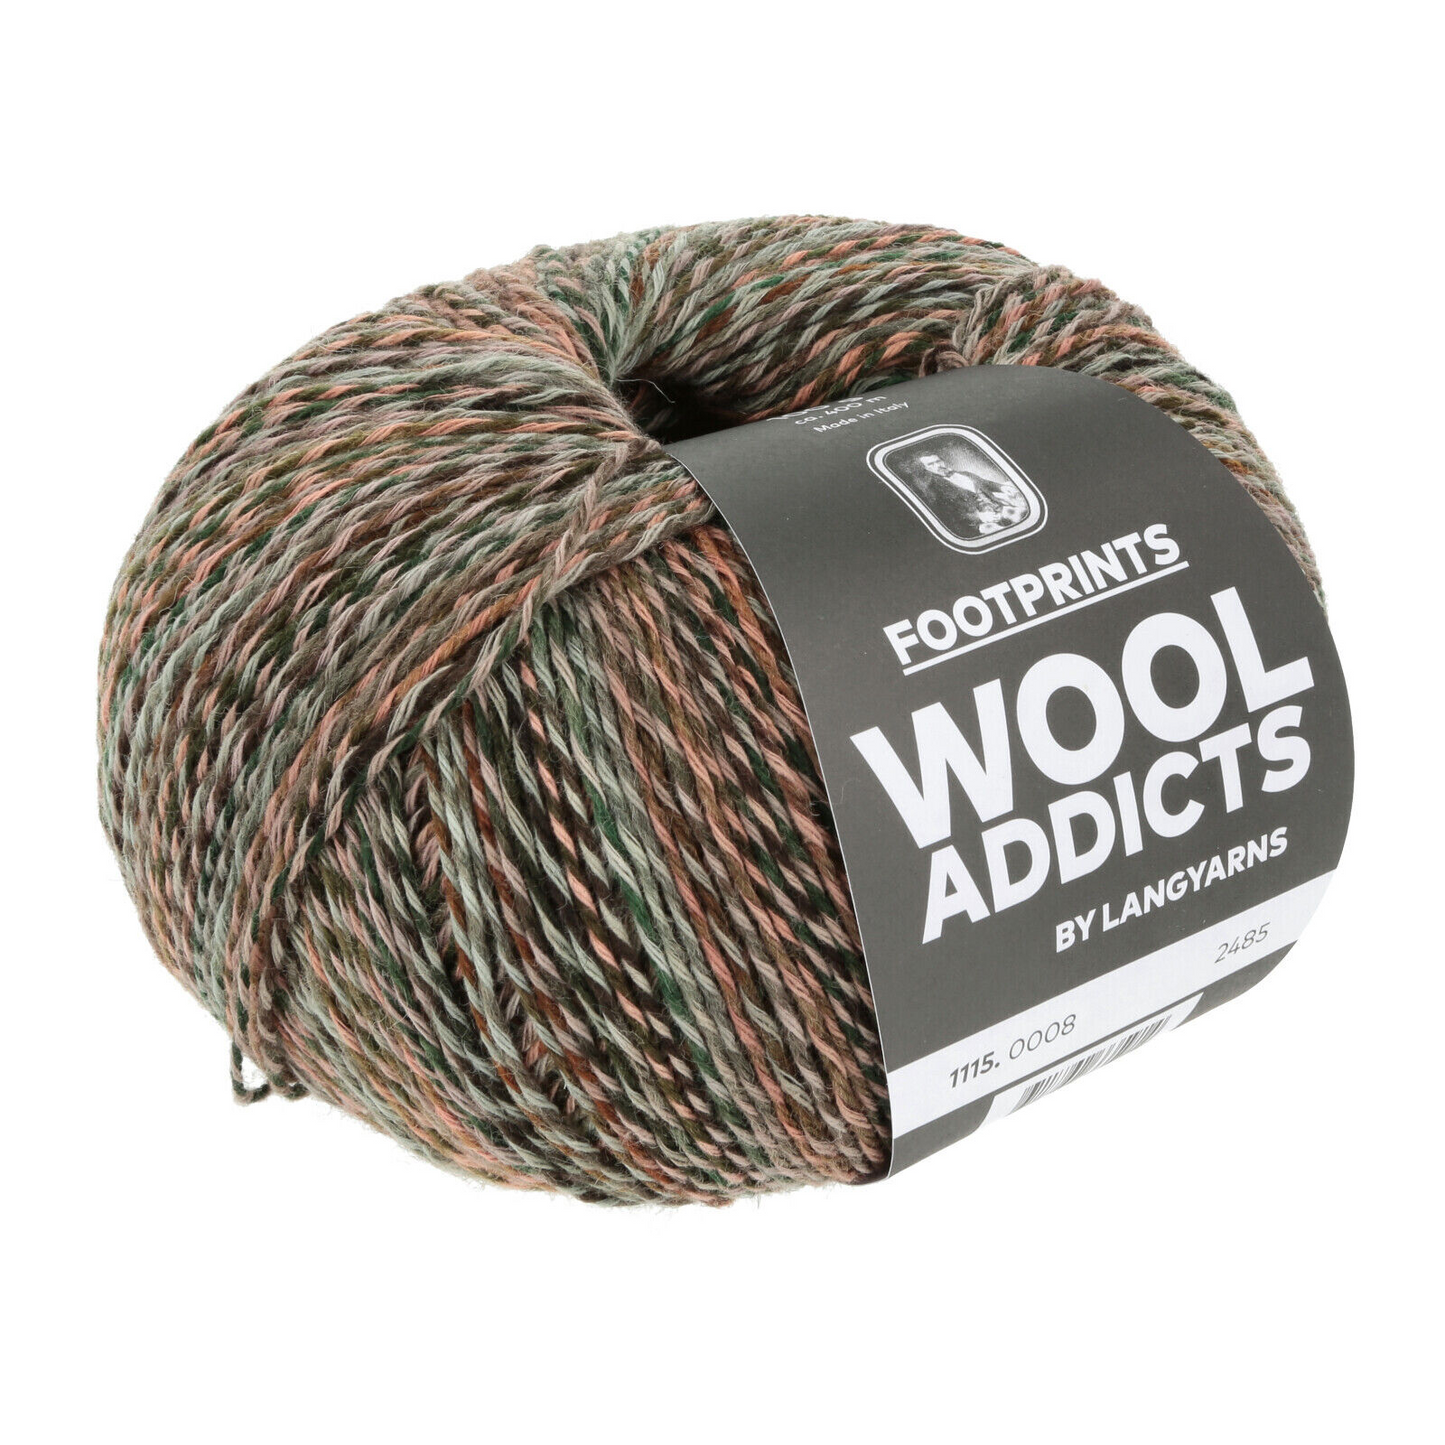 WOOL ADDICTS by Langyarns